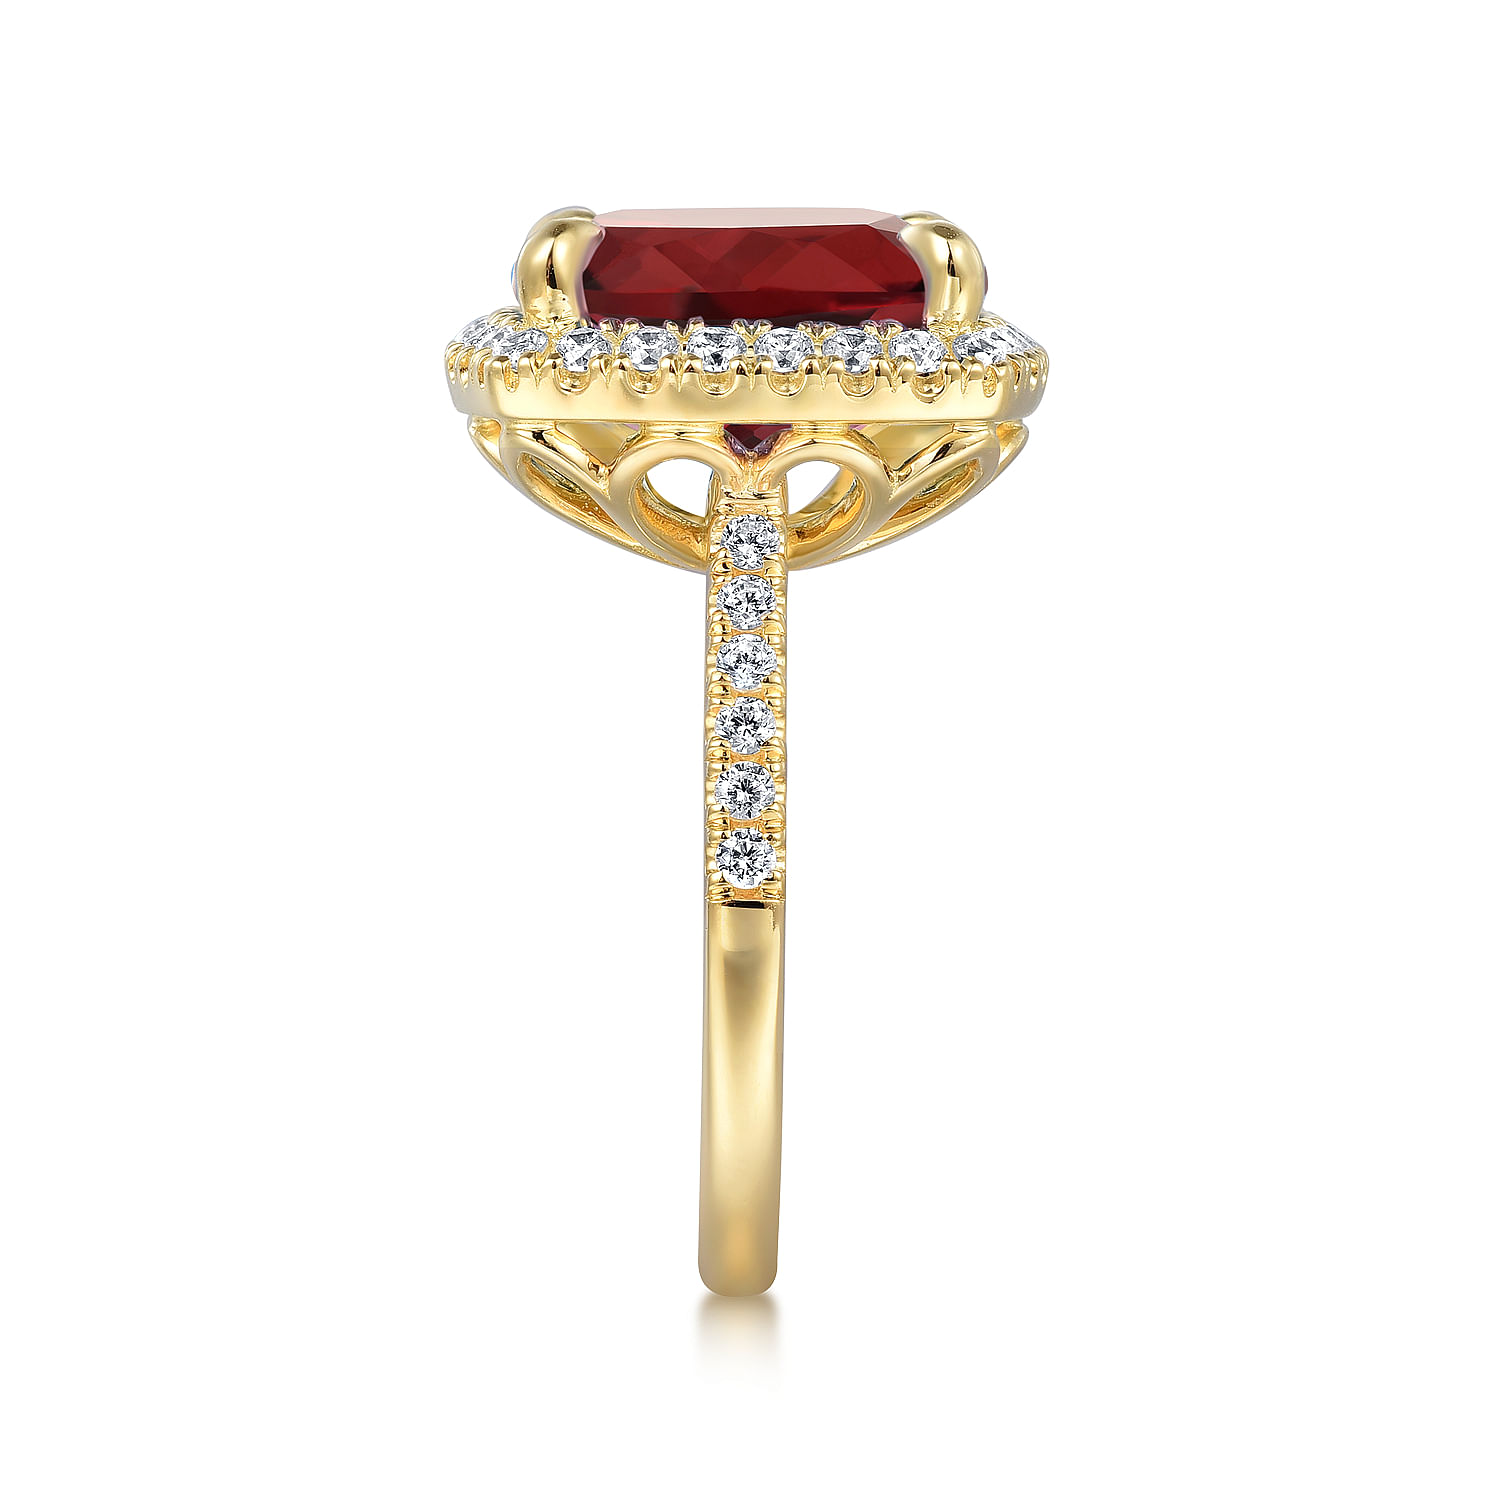 14K Yellow Gold Diamond and Garnet Cushion Cut Ladies Ring With Flower Pattern Gallery